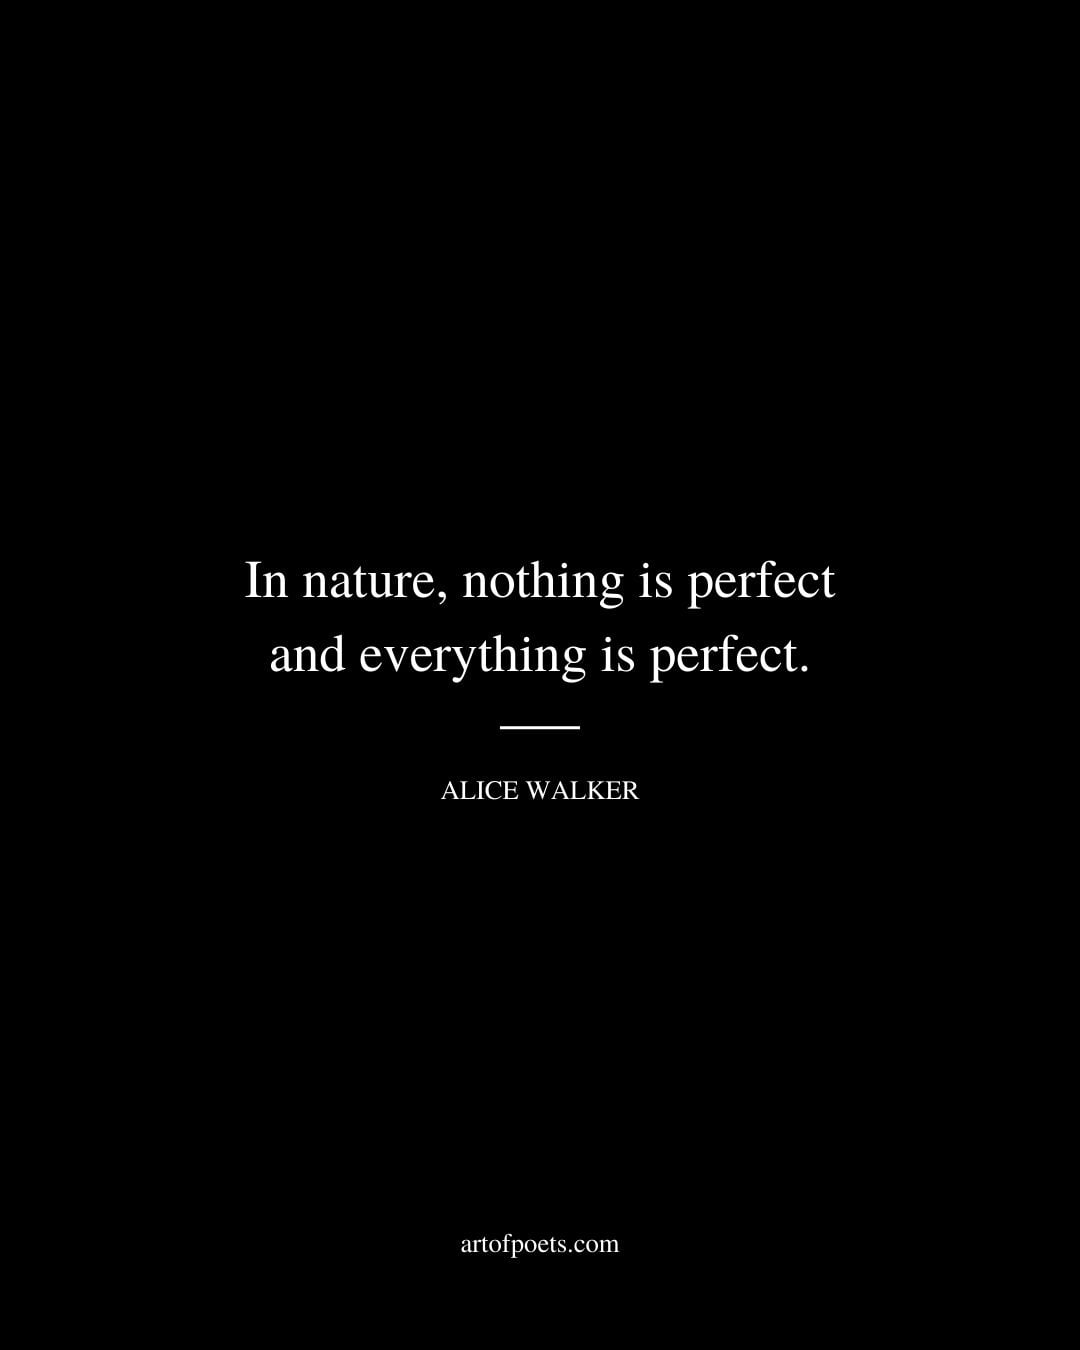 In nature nothing is perfect and everything is perfect. – Alice Walker